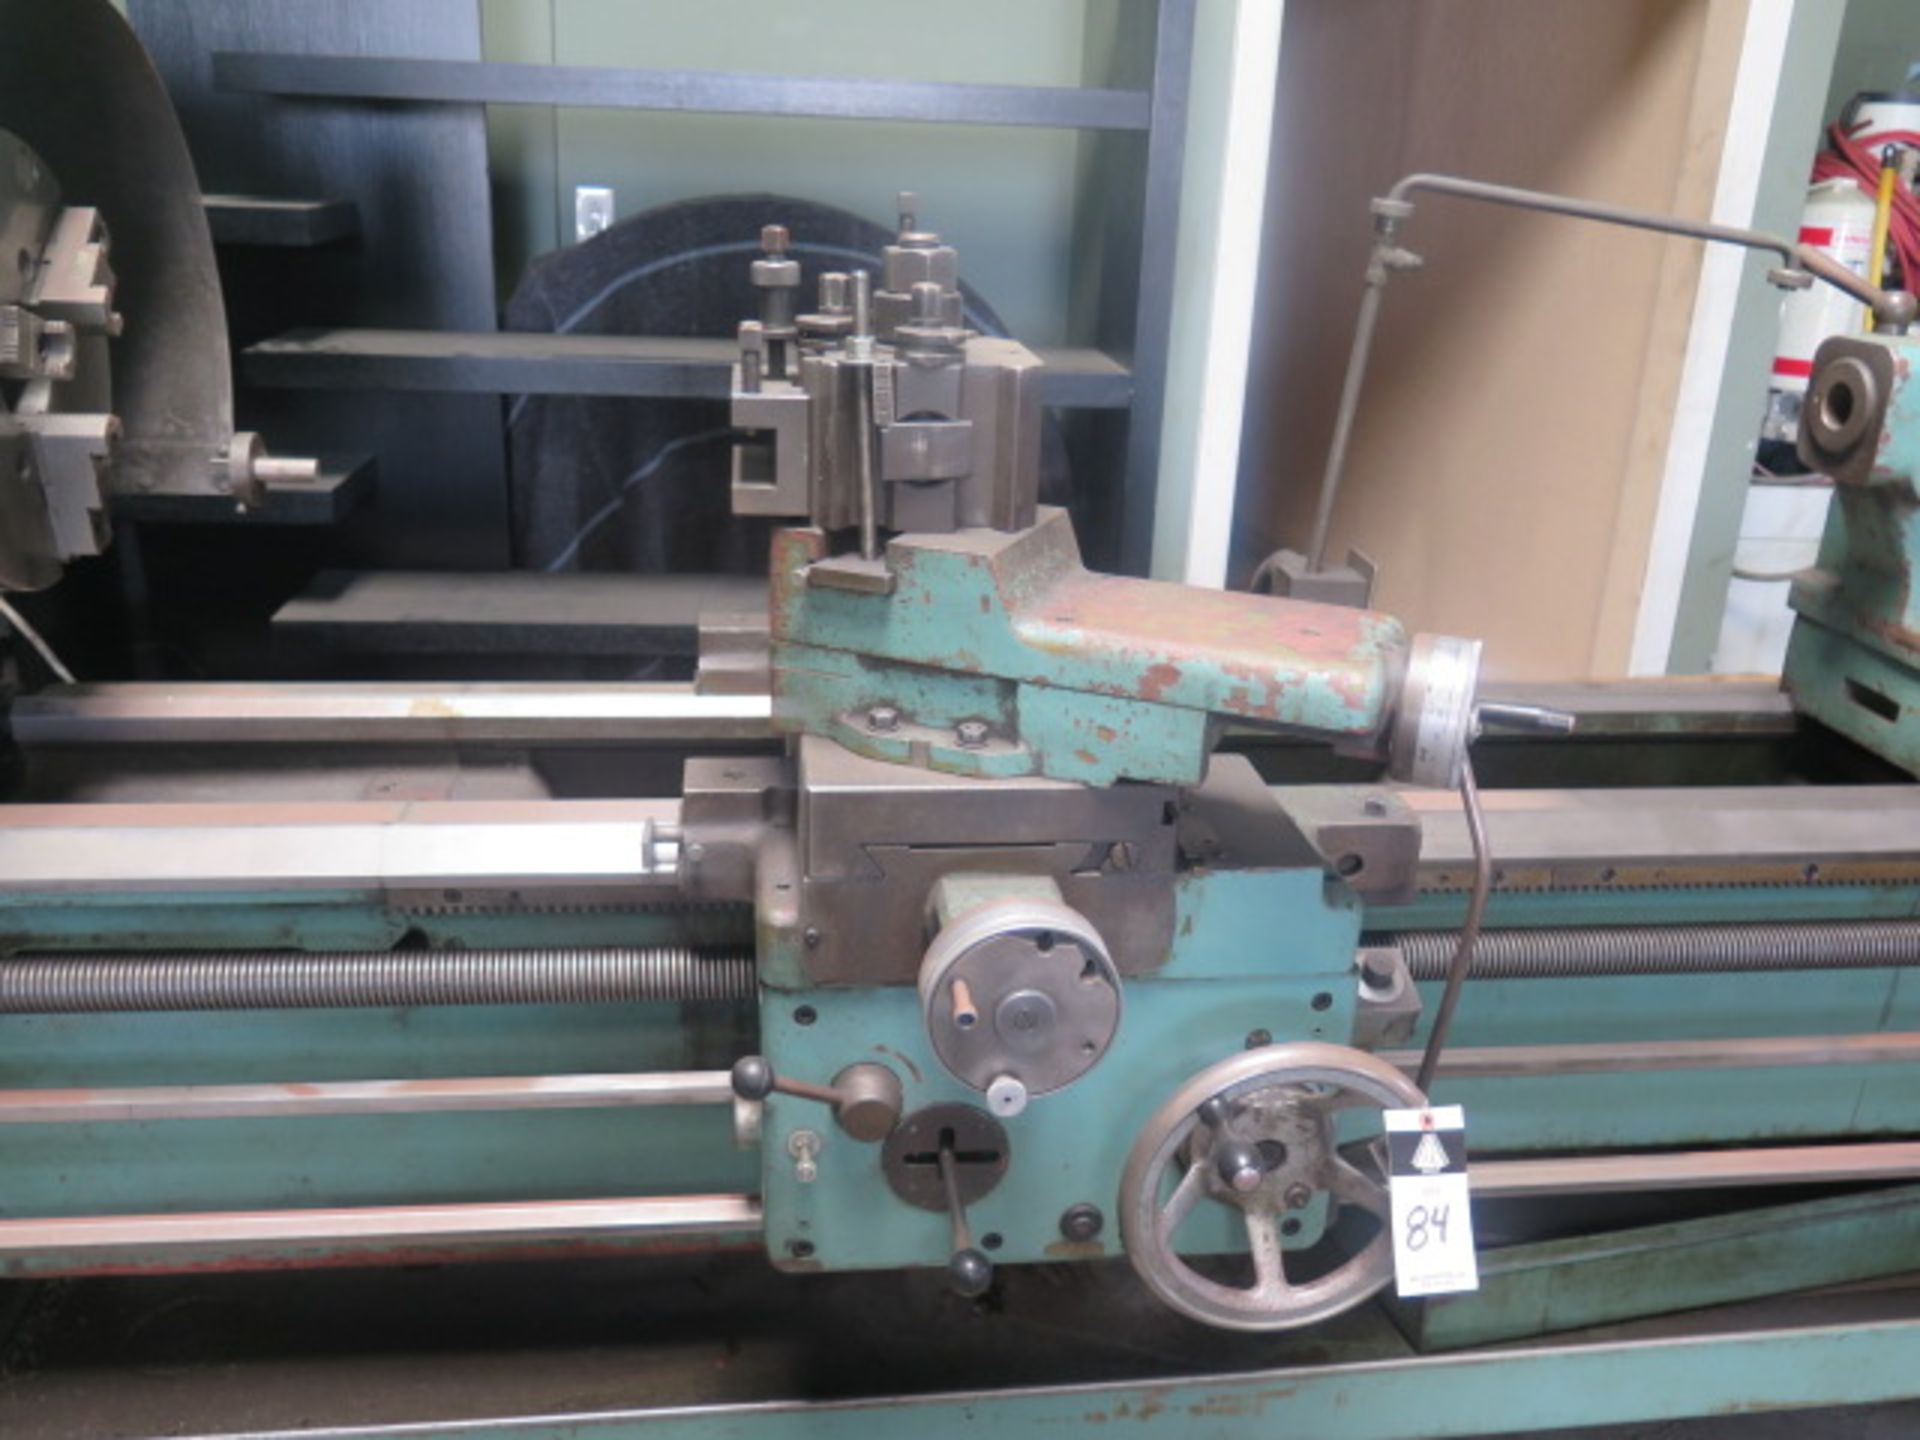 TOS Type SN71B 28” x 90” Geared Head Gap Bed Lathe s/n 071200760374 w/ 10-1000 RPM, Inch - Image 5 of 9